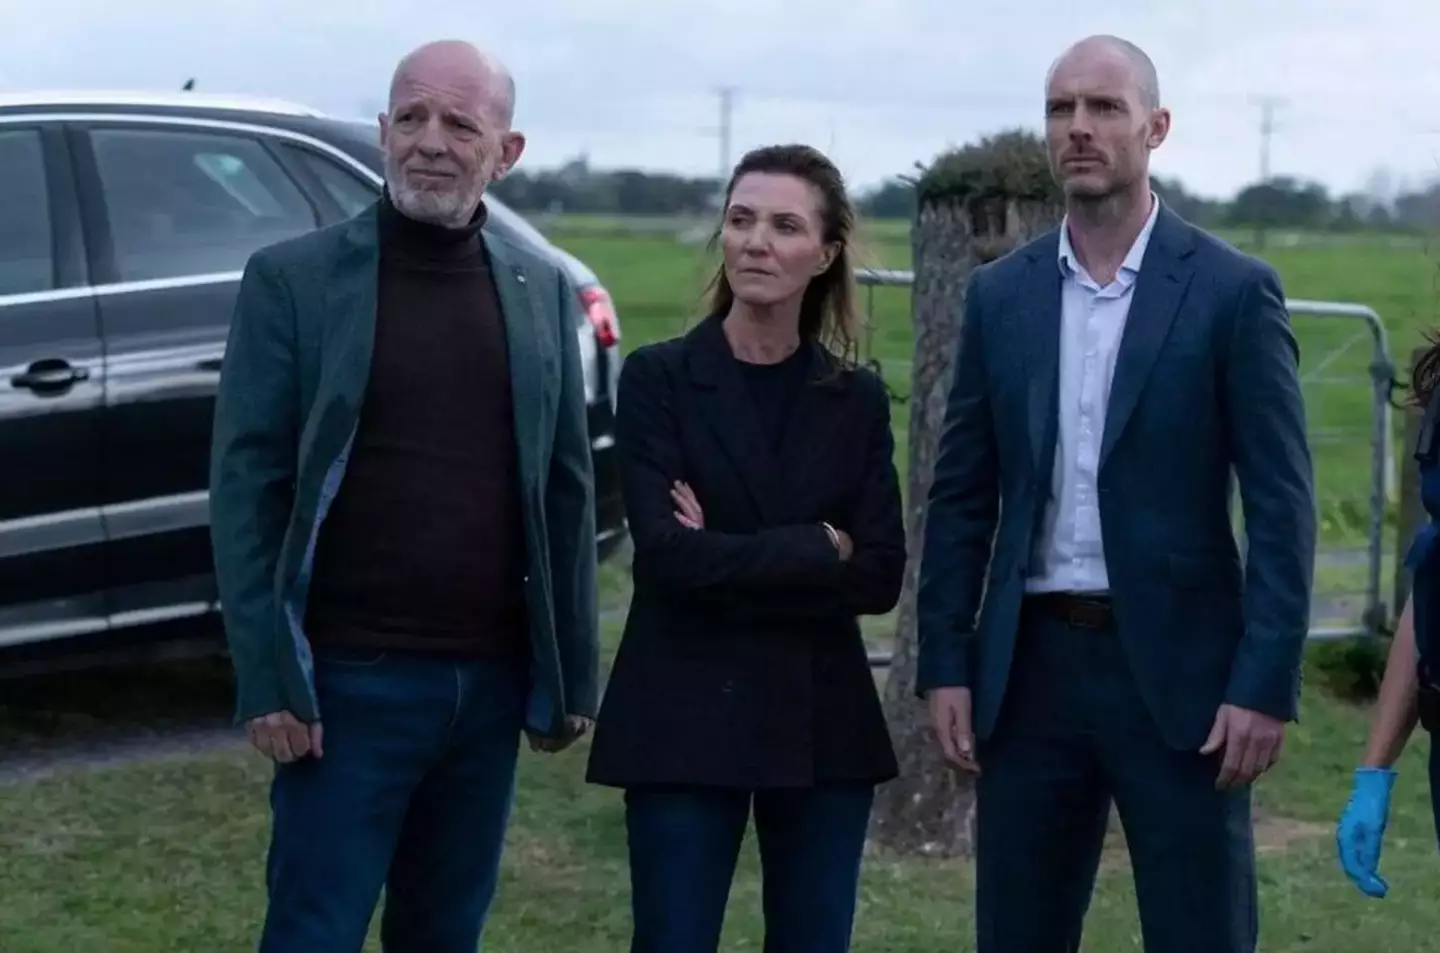 The drama series, which sees an Irish couple go missing in New Zealand, has been reported to be coming back for a sequel series (TVNZ/RTE)